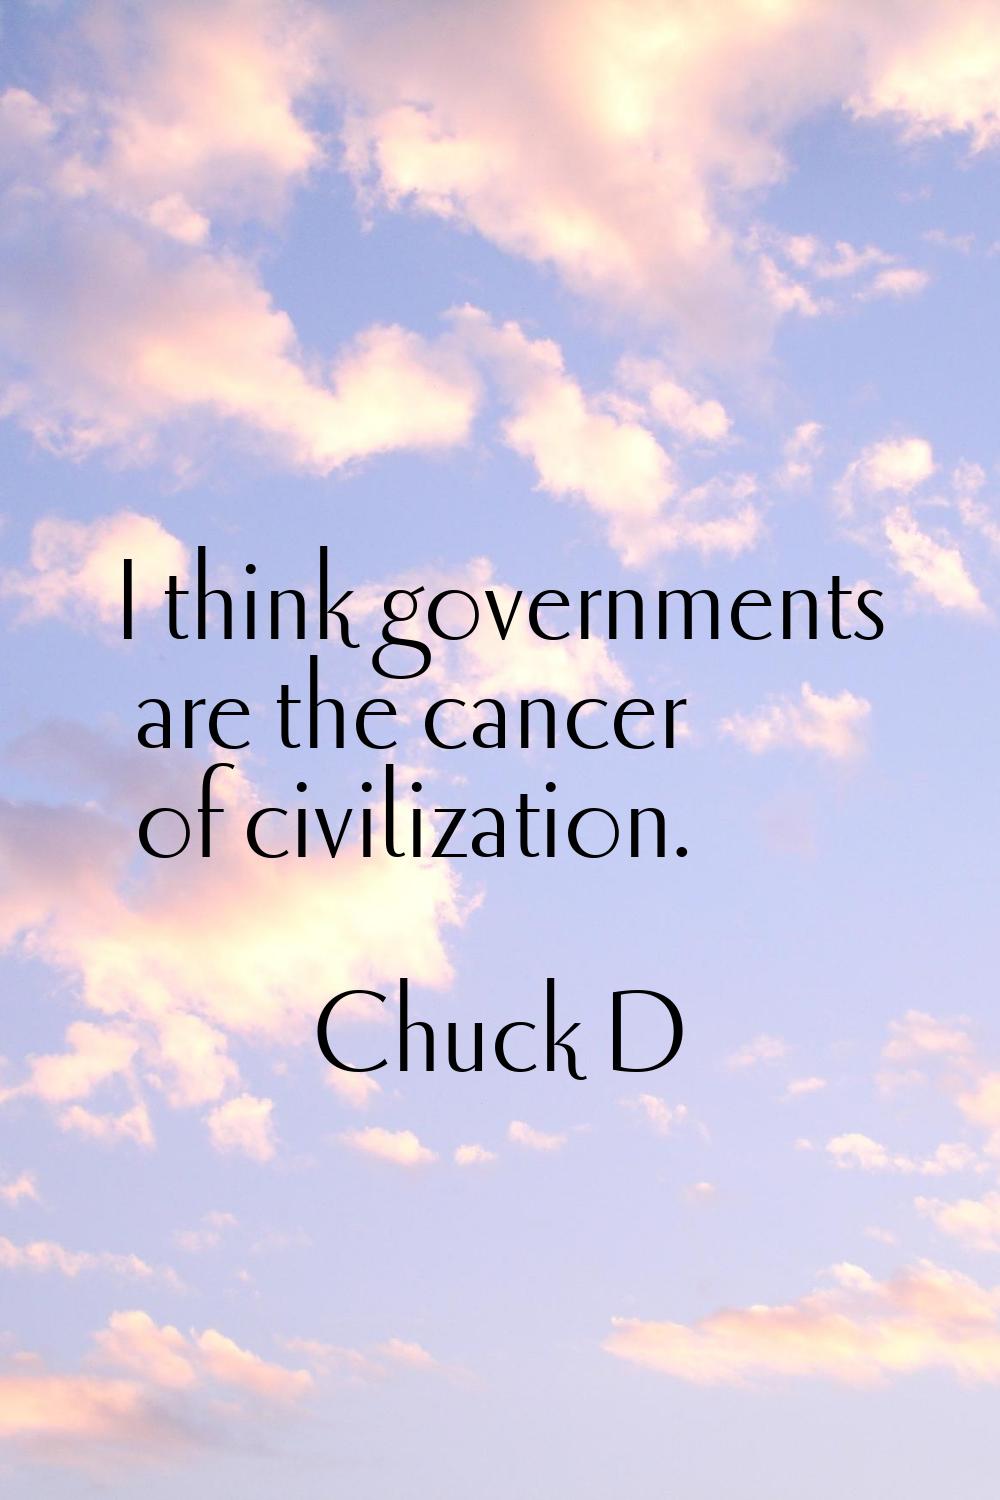 I think governments are the cancer of civilization.